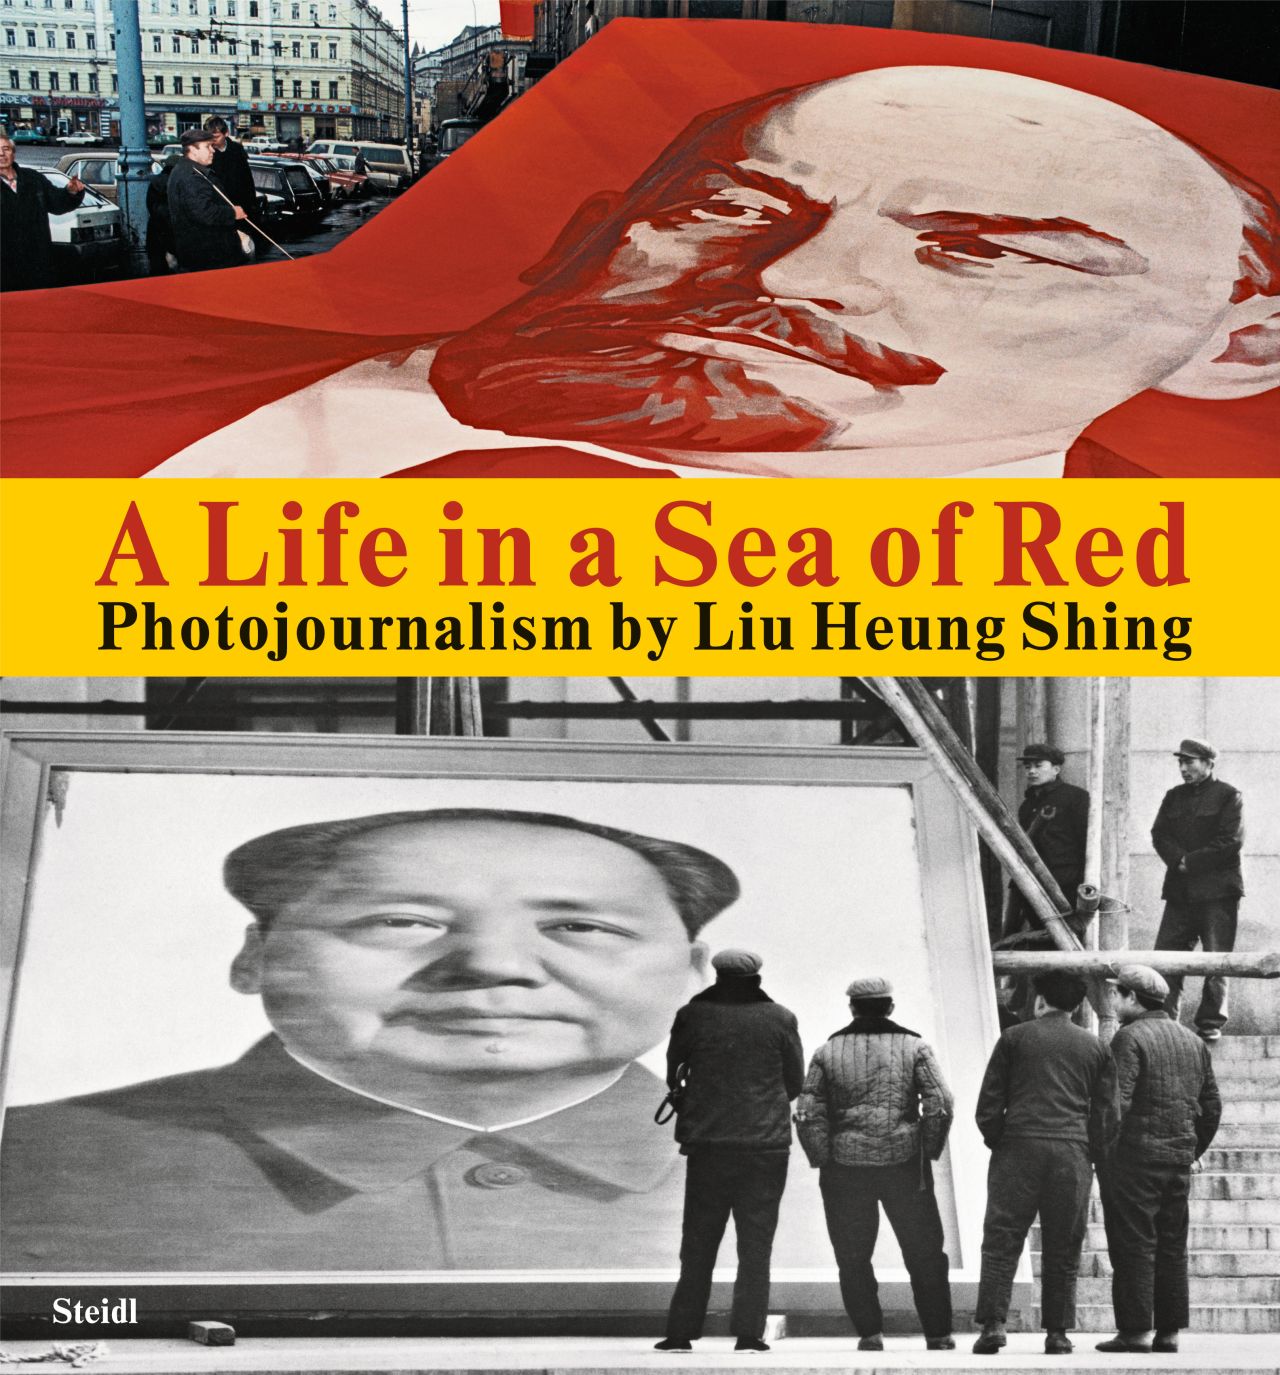 "<a href="https://steidl.de/Books/A-Life-in-a-Sea-of-Red-0311164760.html" target="_blank" target="_blank">Liu Heung Shing: A Life in a Sea of Red</a>," published by Steidl, is available now.